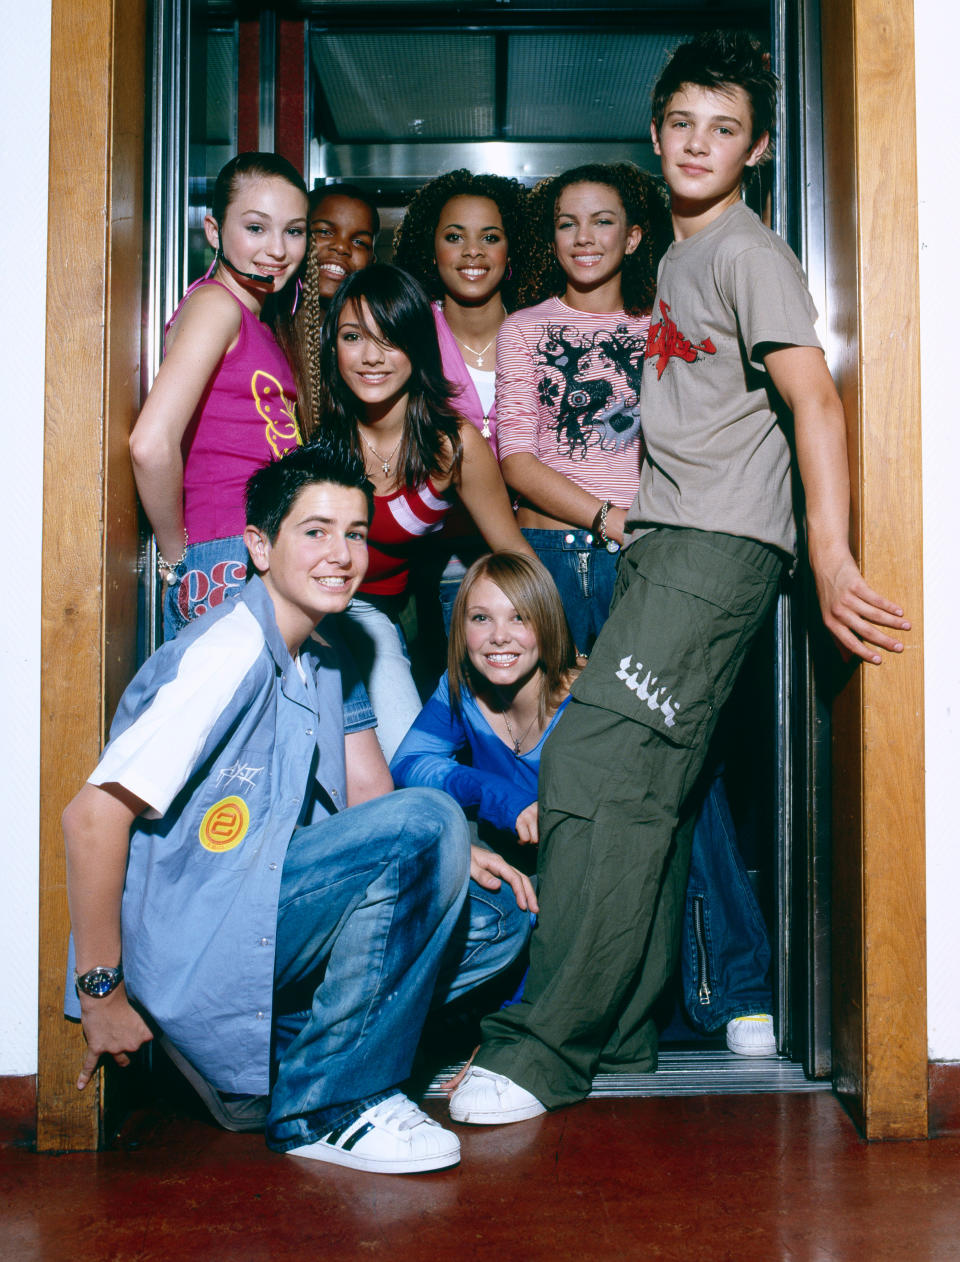 S Club Juniors backstage at a TV show, London, circa 2002. Left to right (back) Daisy Evans, Jay Asforis, Frankie Sandford, Rochelle Wiseman, Stacey McClean, Calvin Goldspink, (kneeling) Aaron Renfree, Hannah Richings. (Photo by David Tonge/Getty Images)